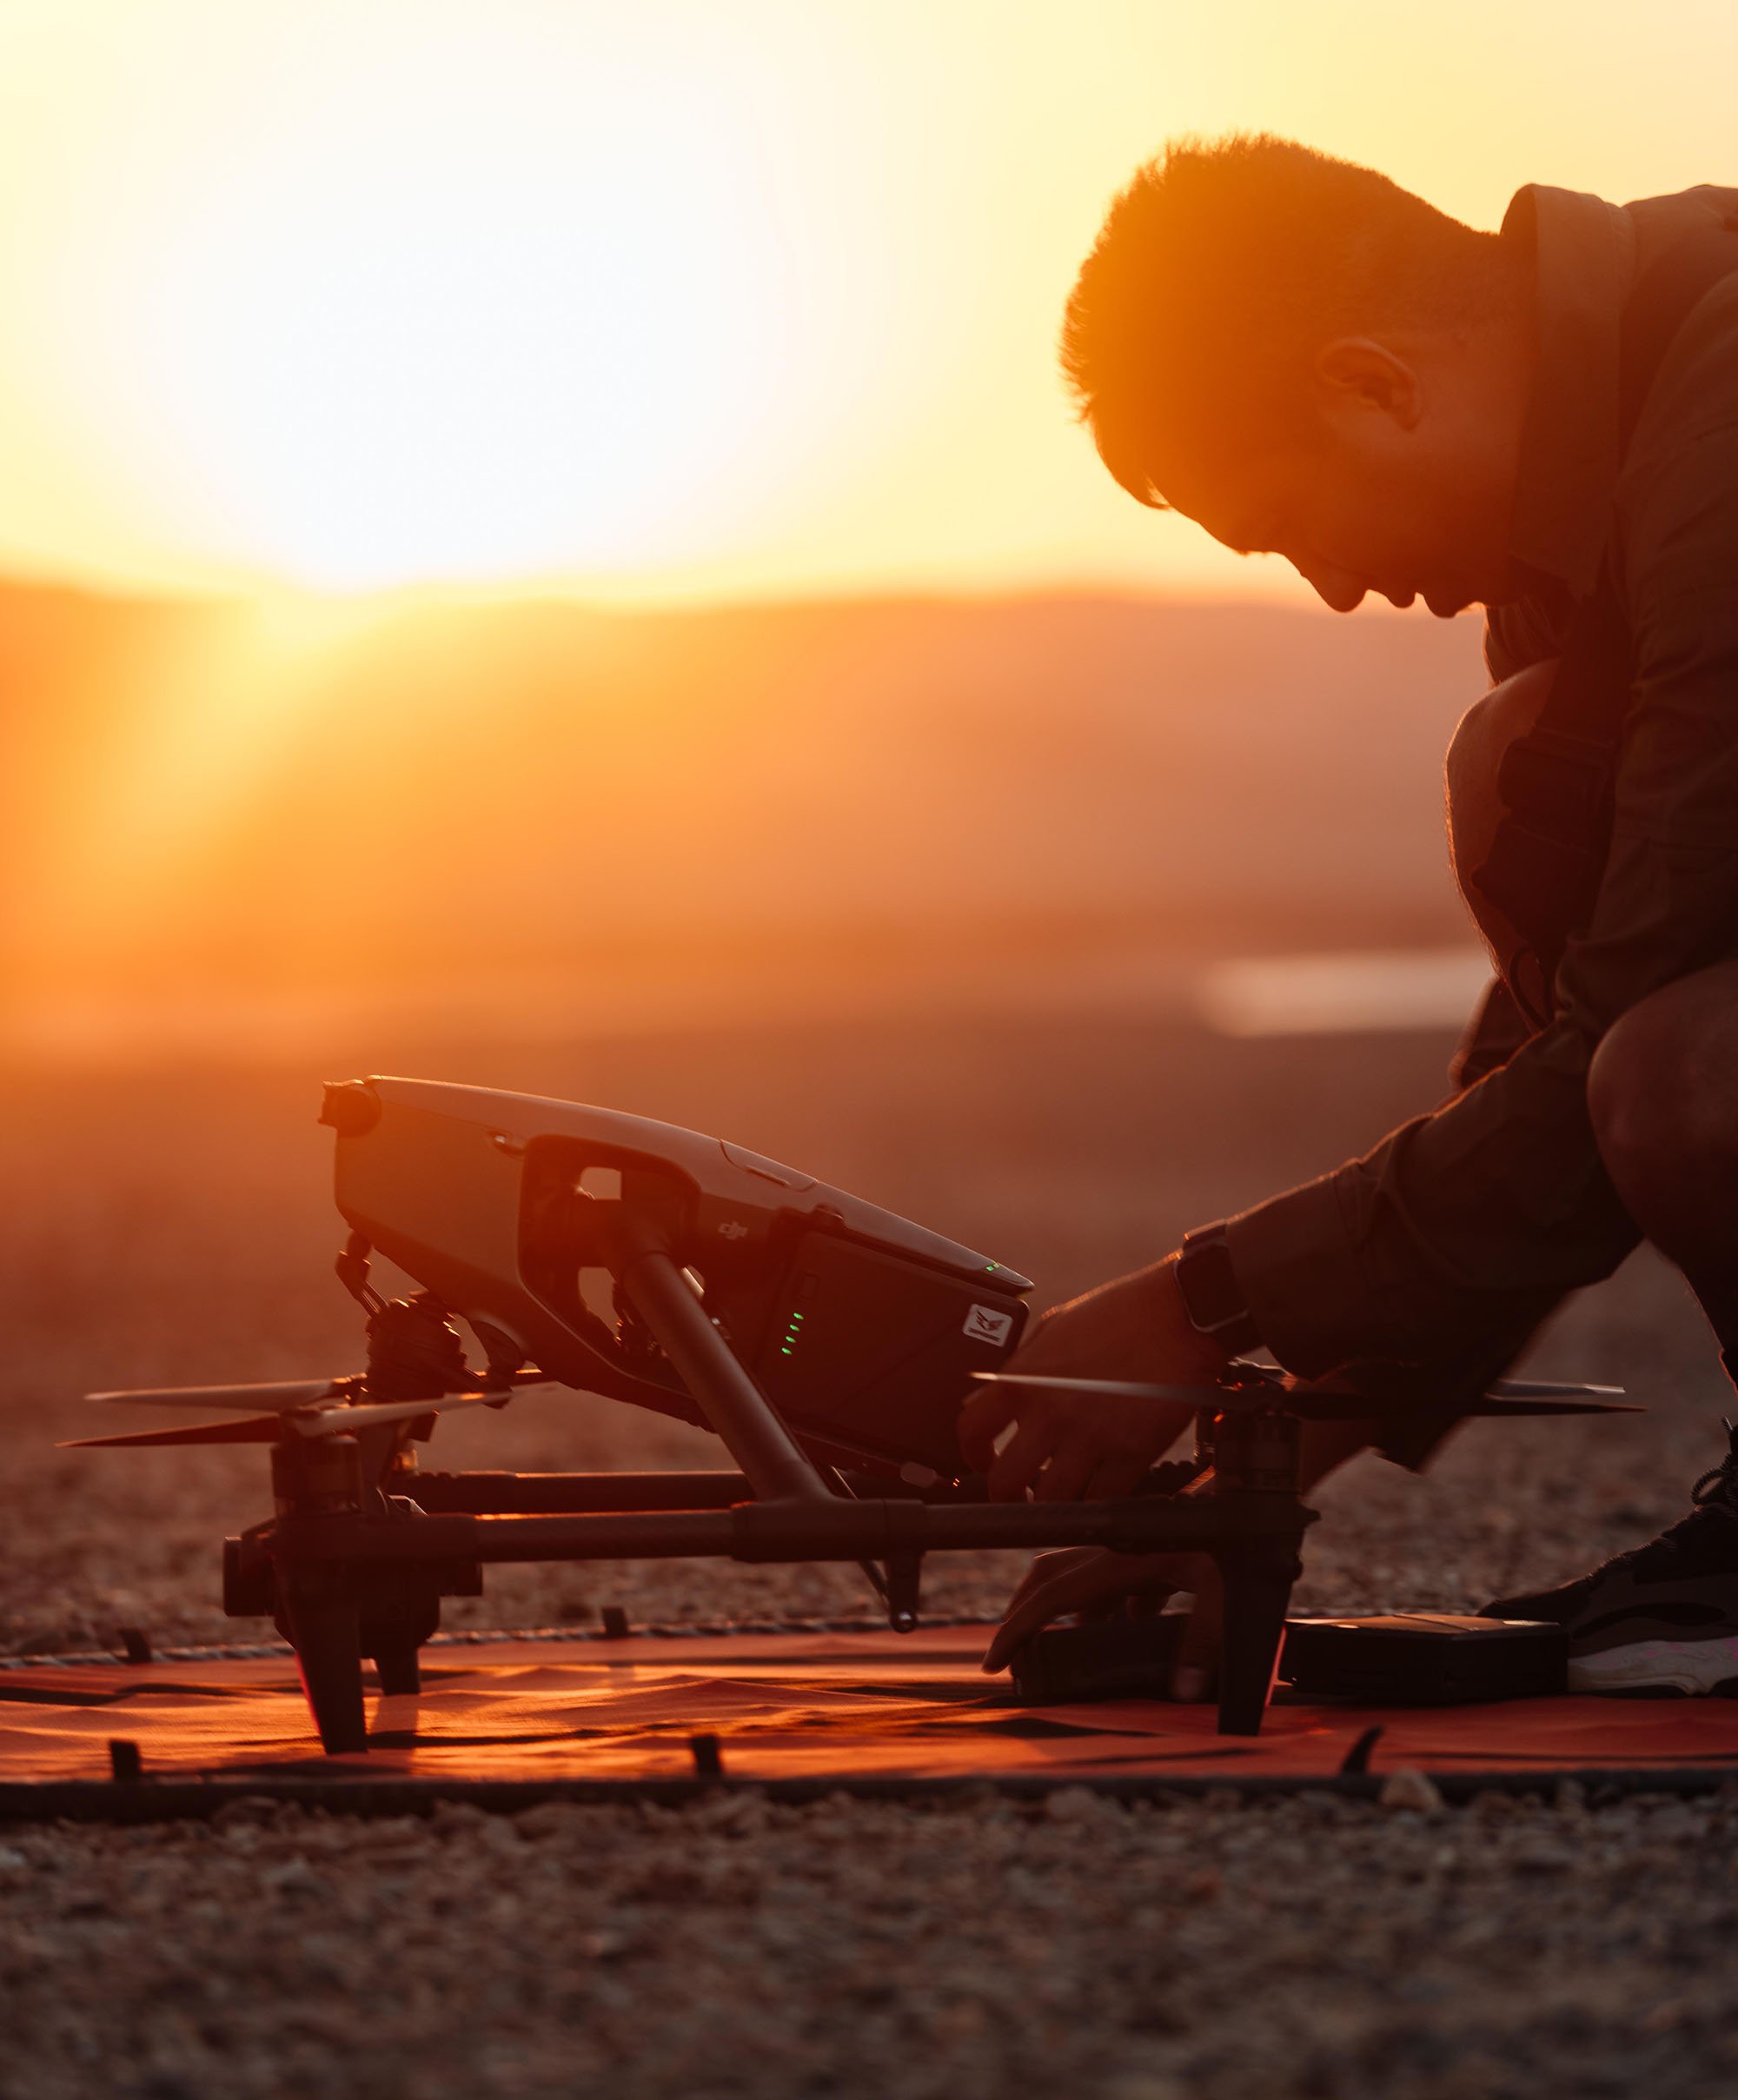 Drone operator with DJI Inspire 3 at sunset. Inspire 3, known for its stunning aerial imagery up to 8k resolution, is favored by filmmakers worldwide for its quick setup and exceptional performance.